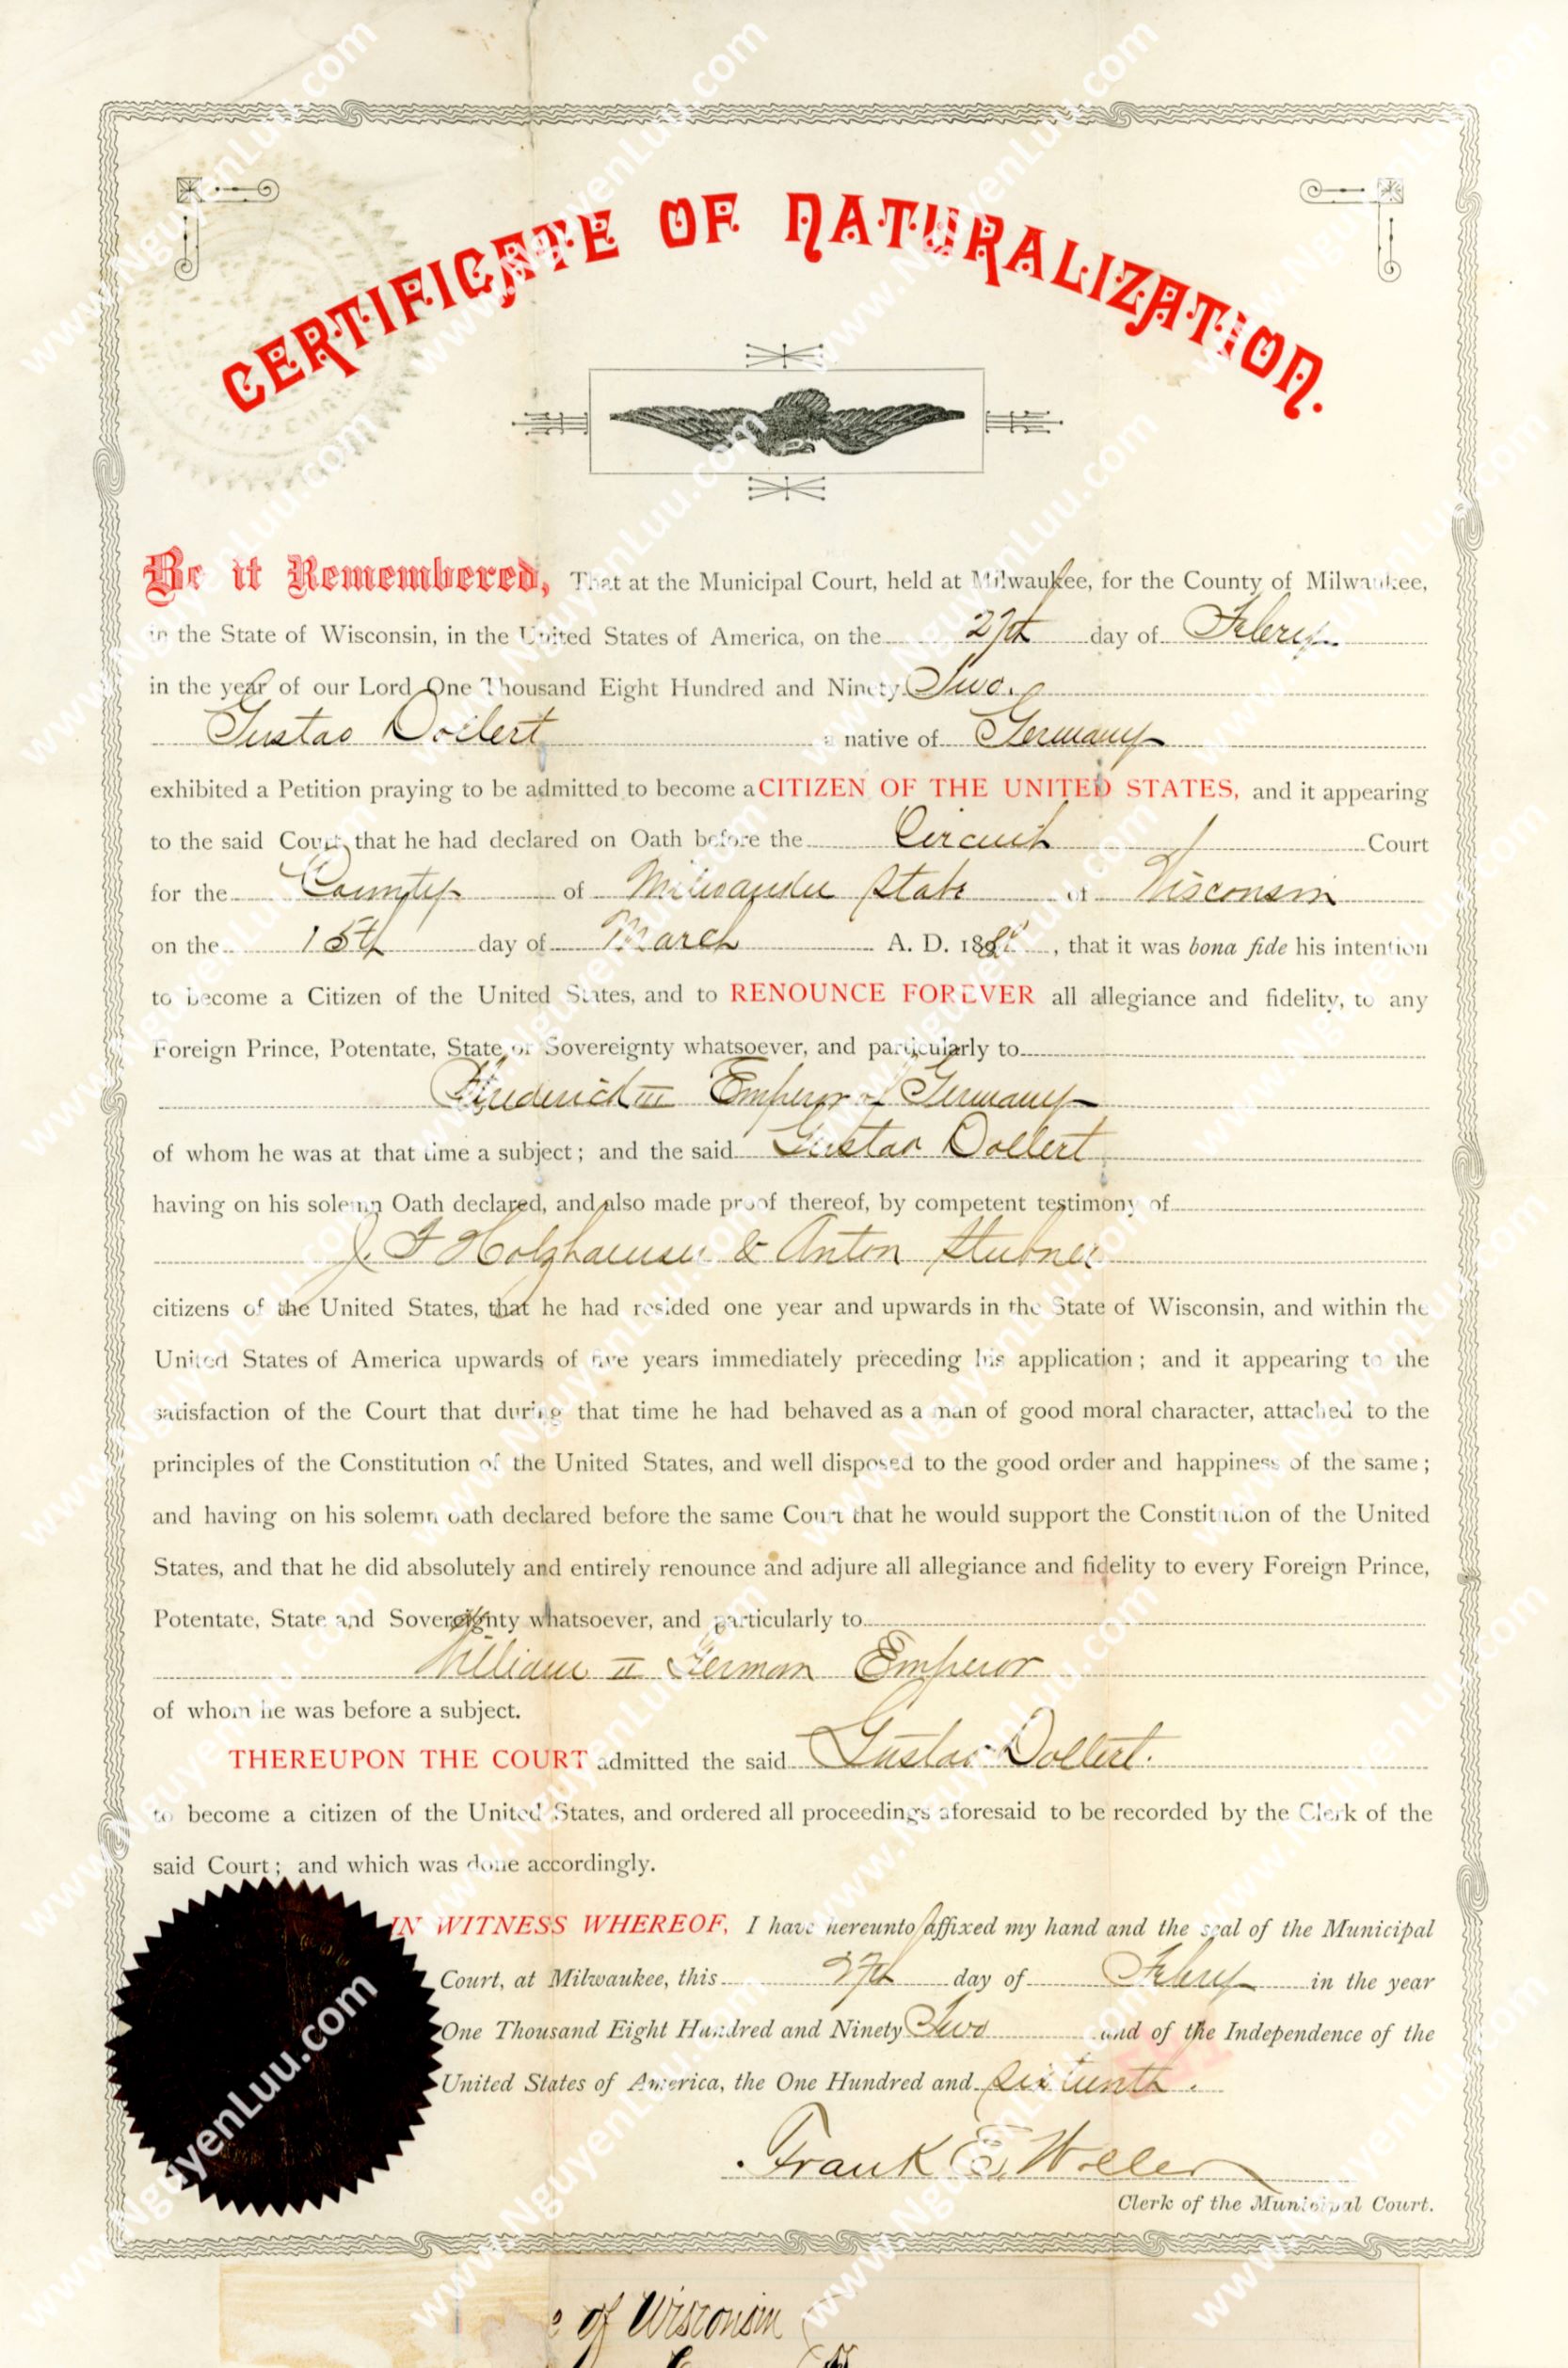 U.S. Certificate of Naturalization issued in the State of Wisconsin in 1892